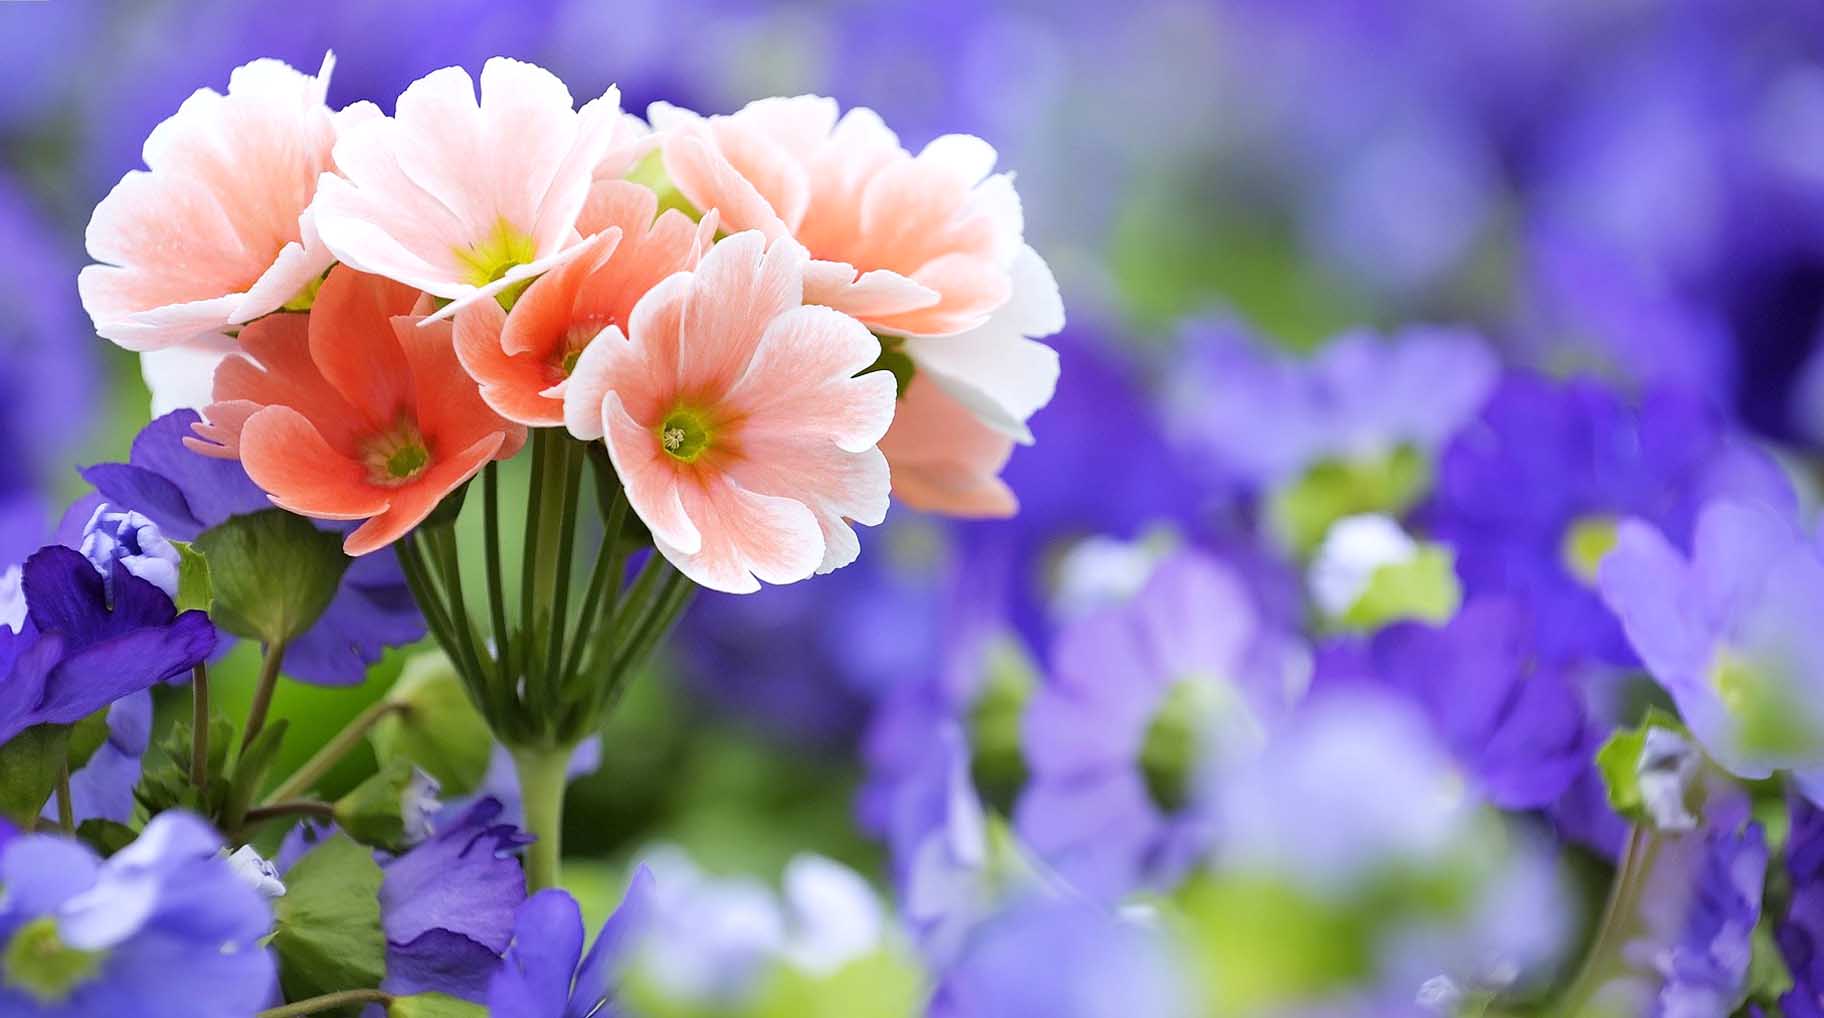 Flowers Wallpapers Free Download Pc   Share Online